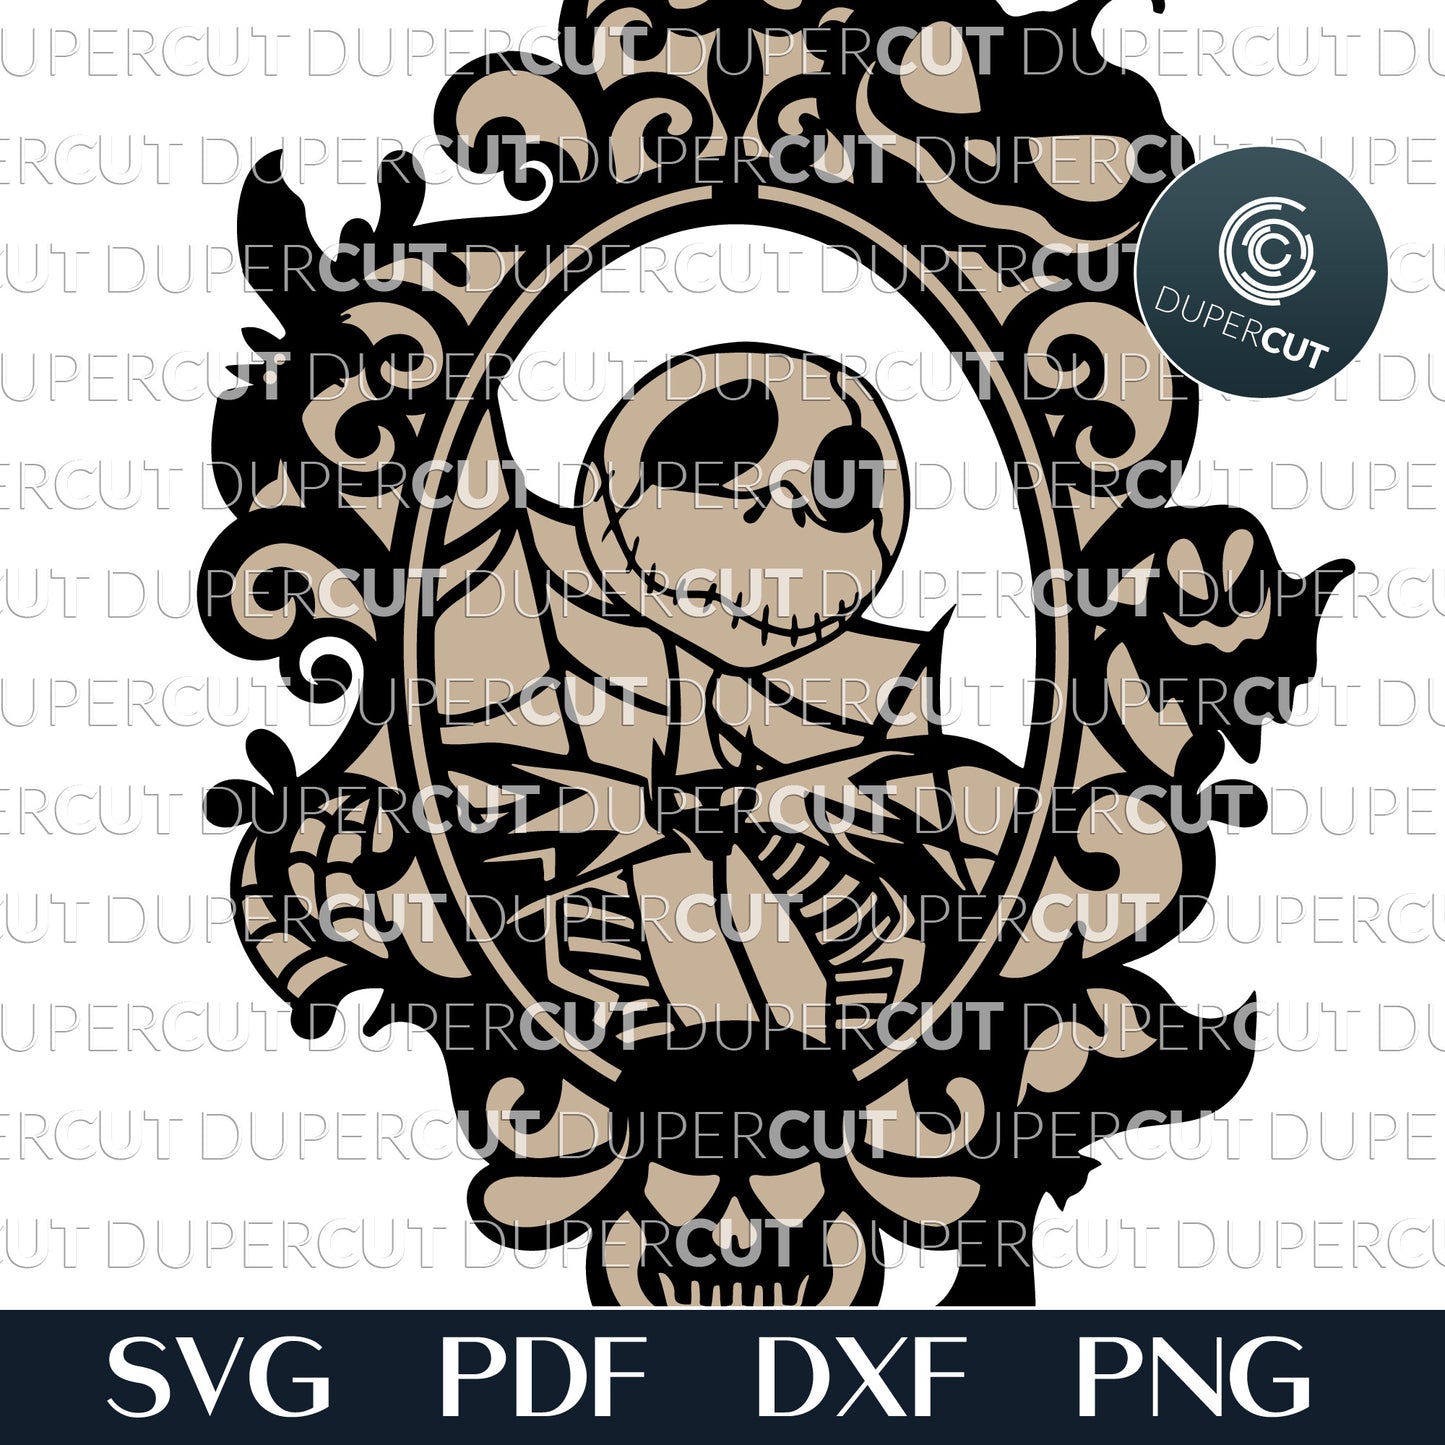 Jack Skellington portrait in a frame Halloween door hanger - SVG PDF DXF layered cutting files for Glowforge, Silhouette cameo, Cricut, CNC plasma laser machines by DuperCut